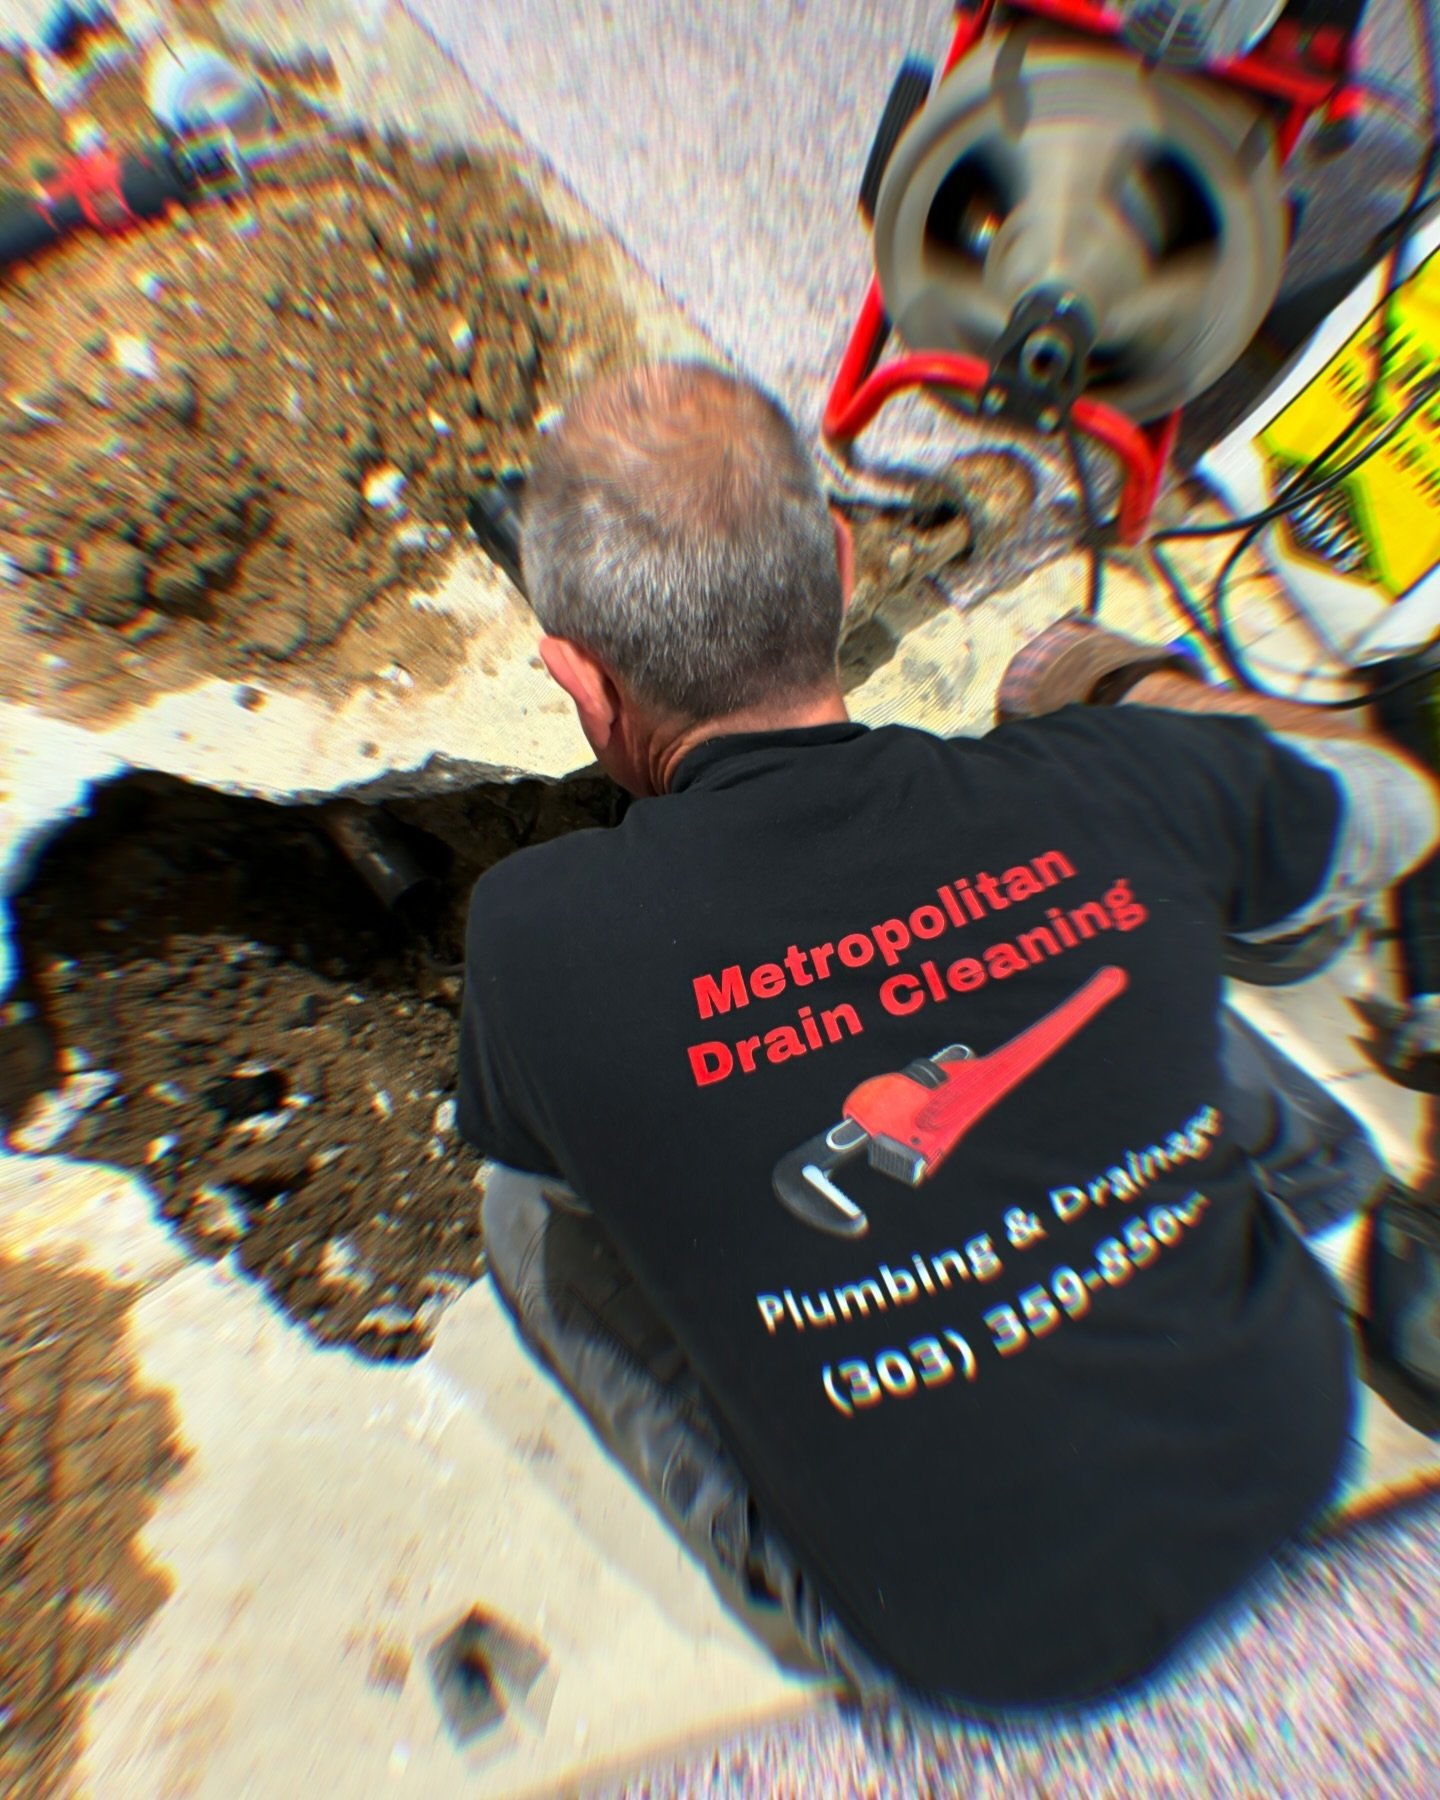 In the depths of your plumbing, we&rsquo;ve got your back&mdash;no clog too tough, no job too deep. 

You can count on Metropolitan Drain Cleaning to have your back! 

Call 303-359-8566
#plumbingservices 
#localbrand 
#piperepair 
#drainsgreat